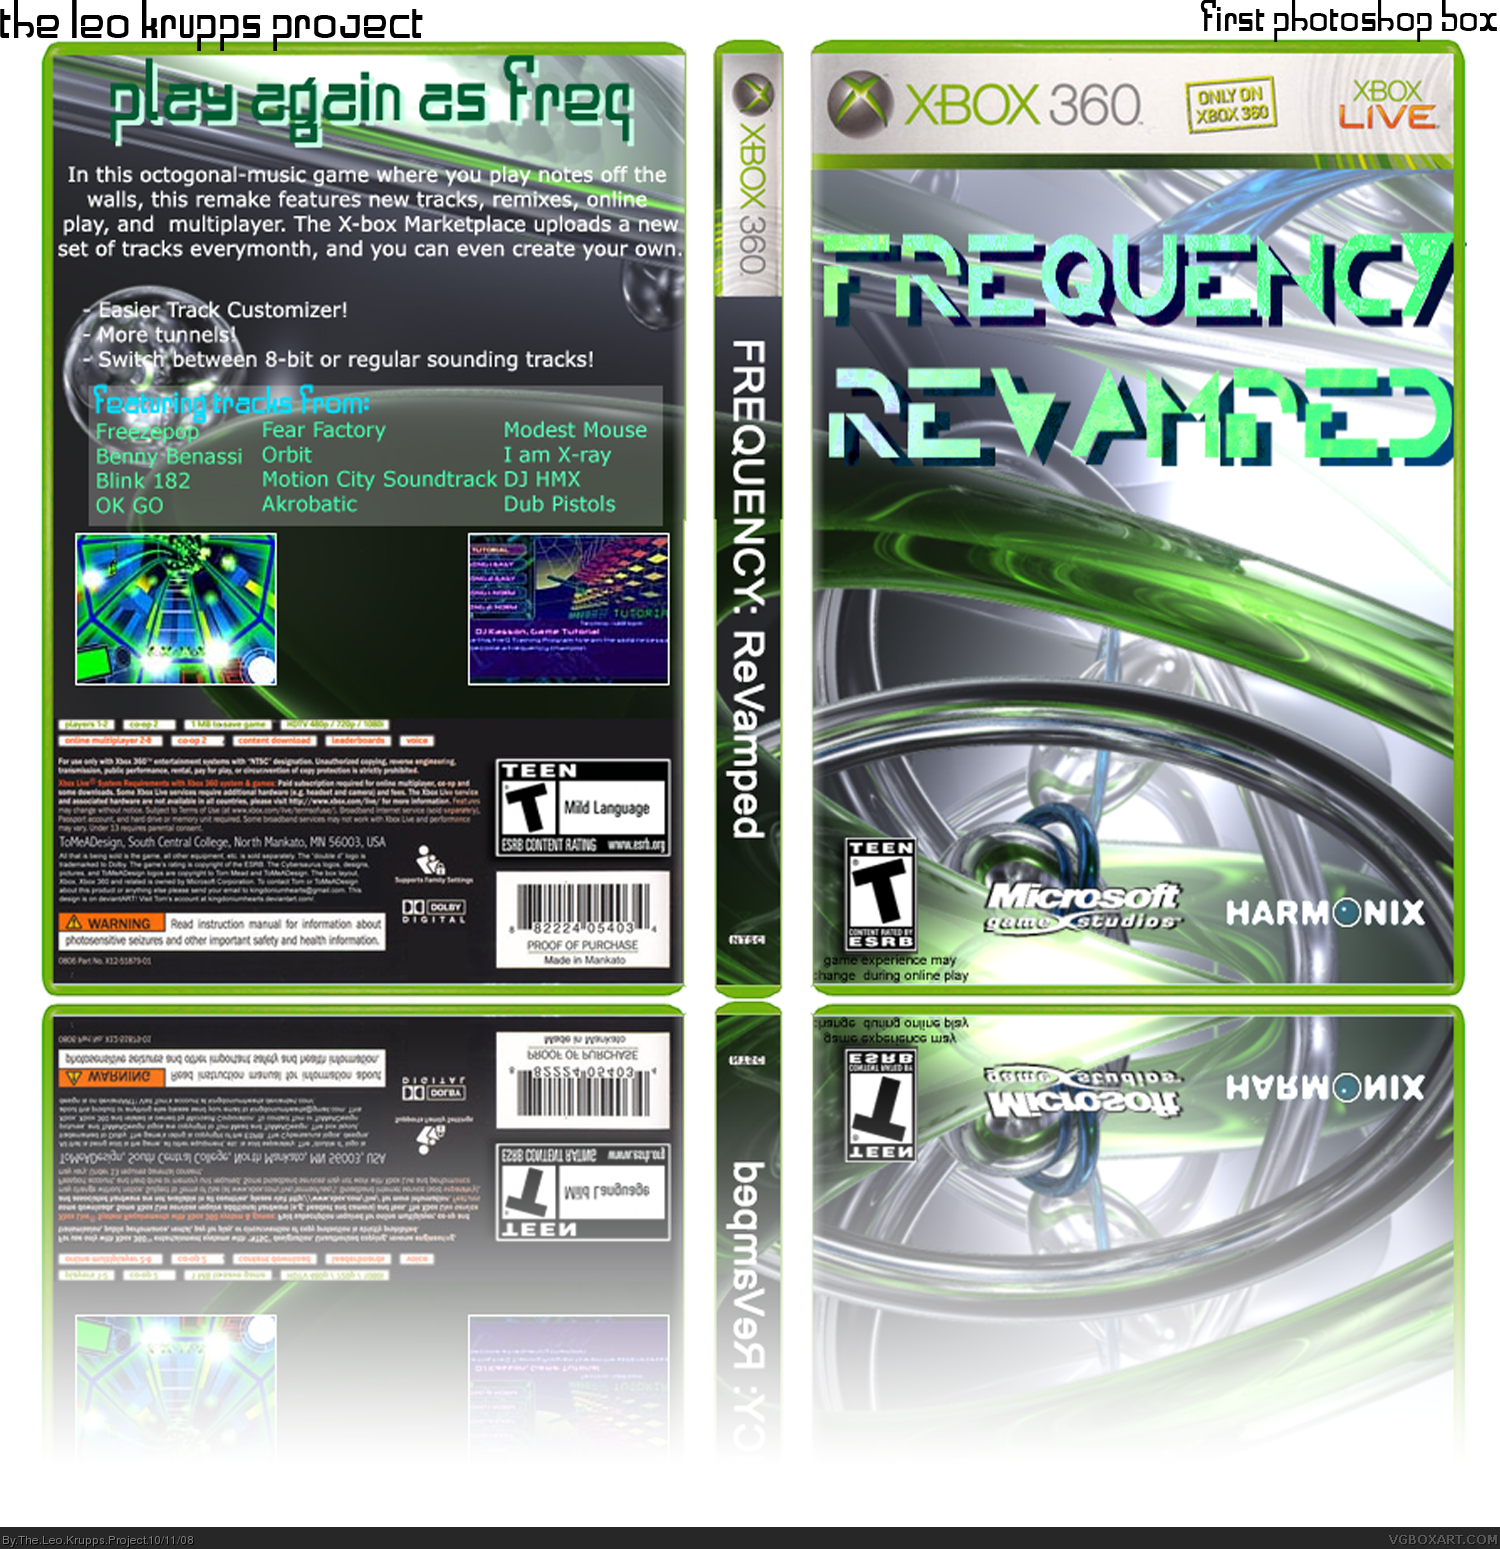 Frequency: Revamped box cover